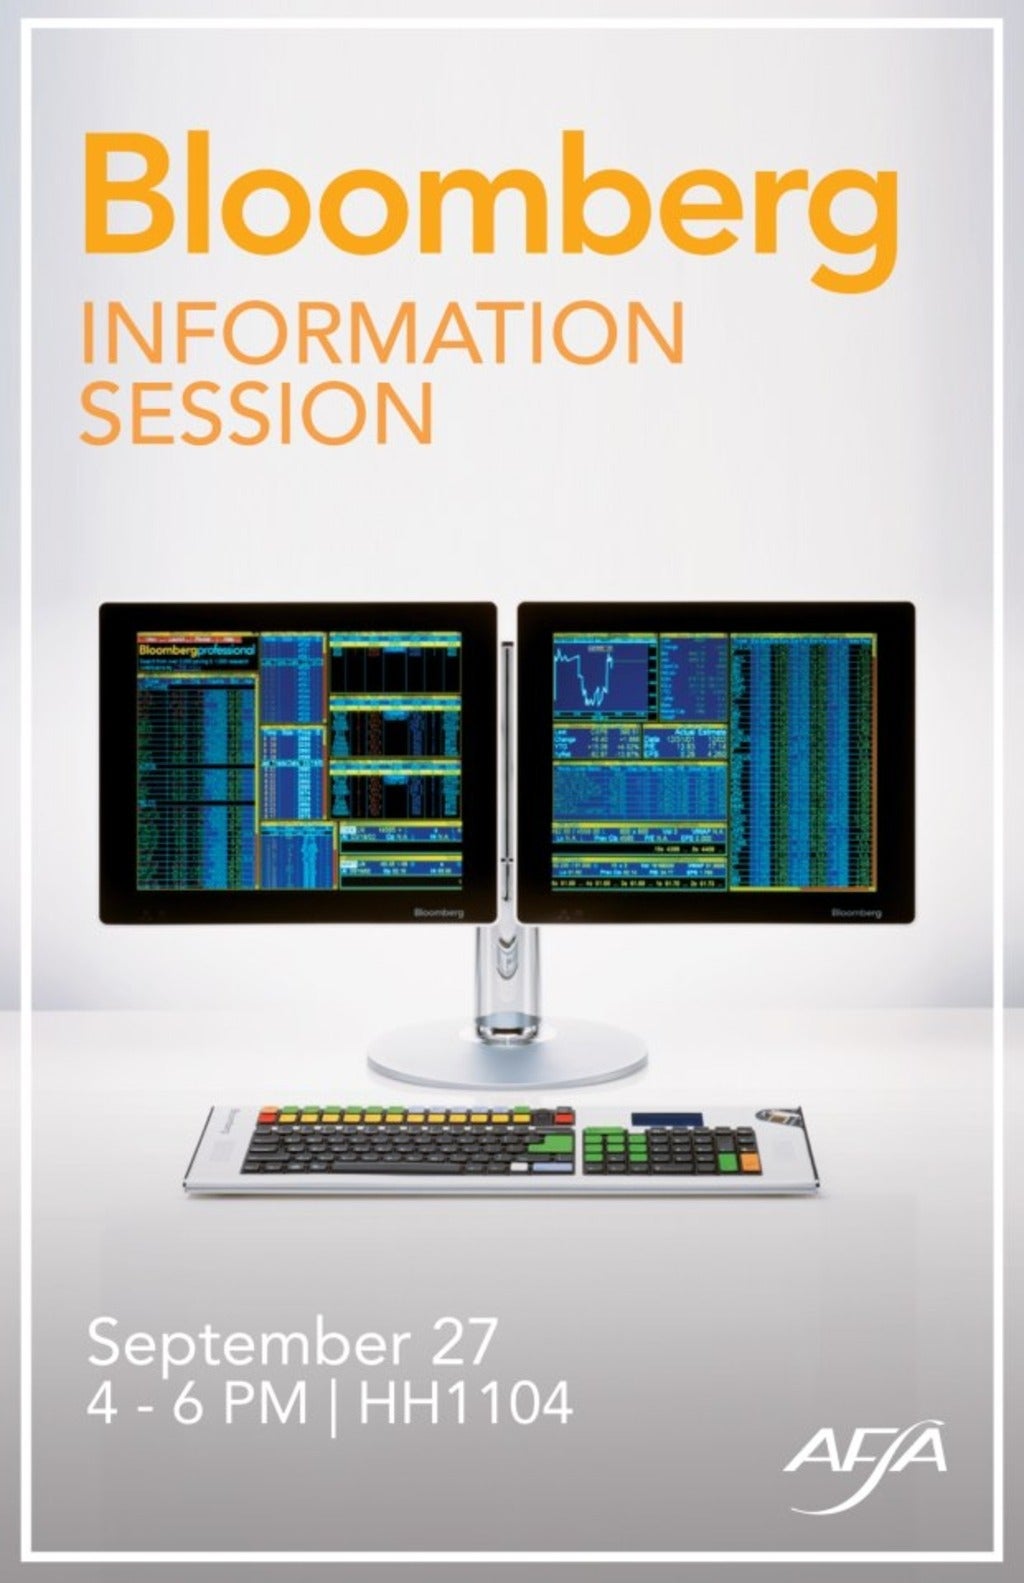 Bloomberg Information Session September 27, 2012 from 4 to 6 pm 